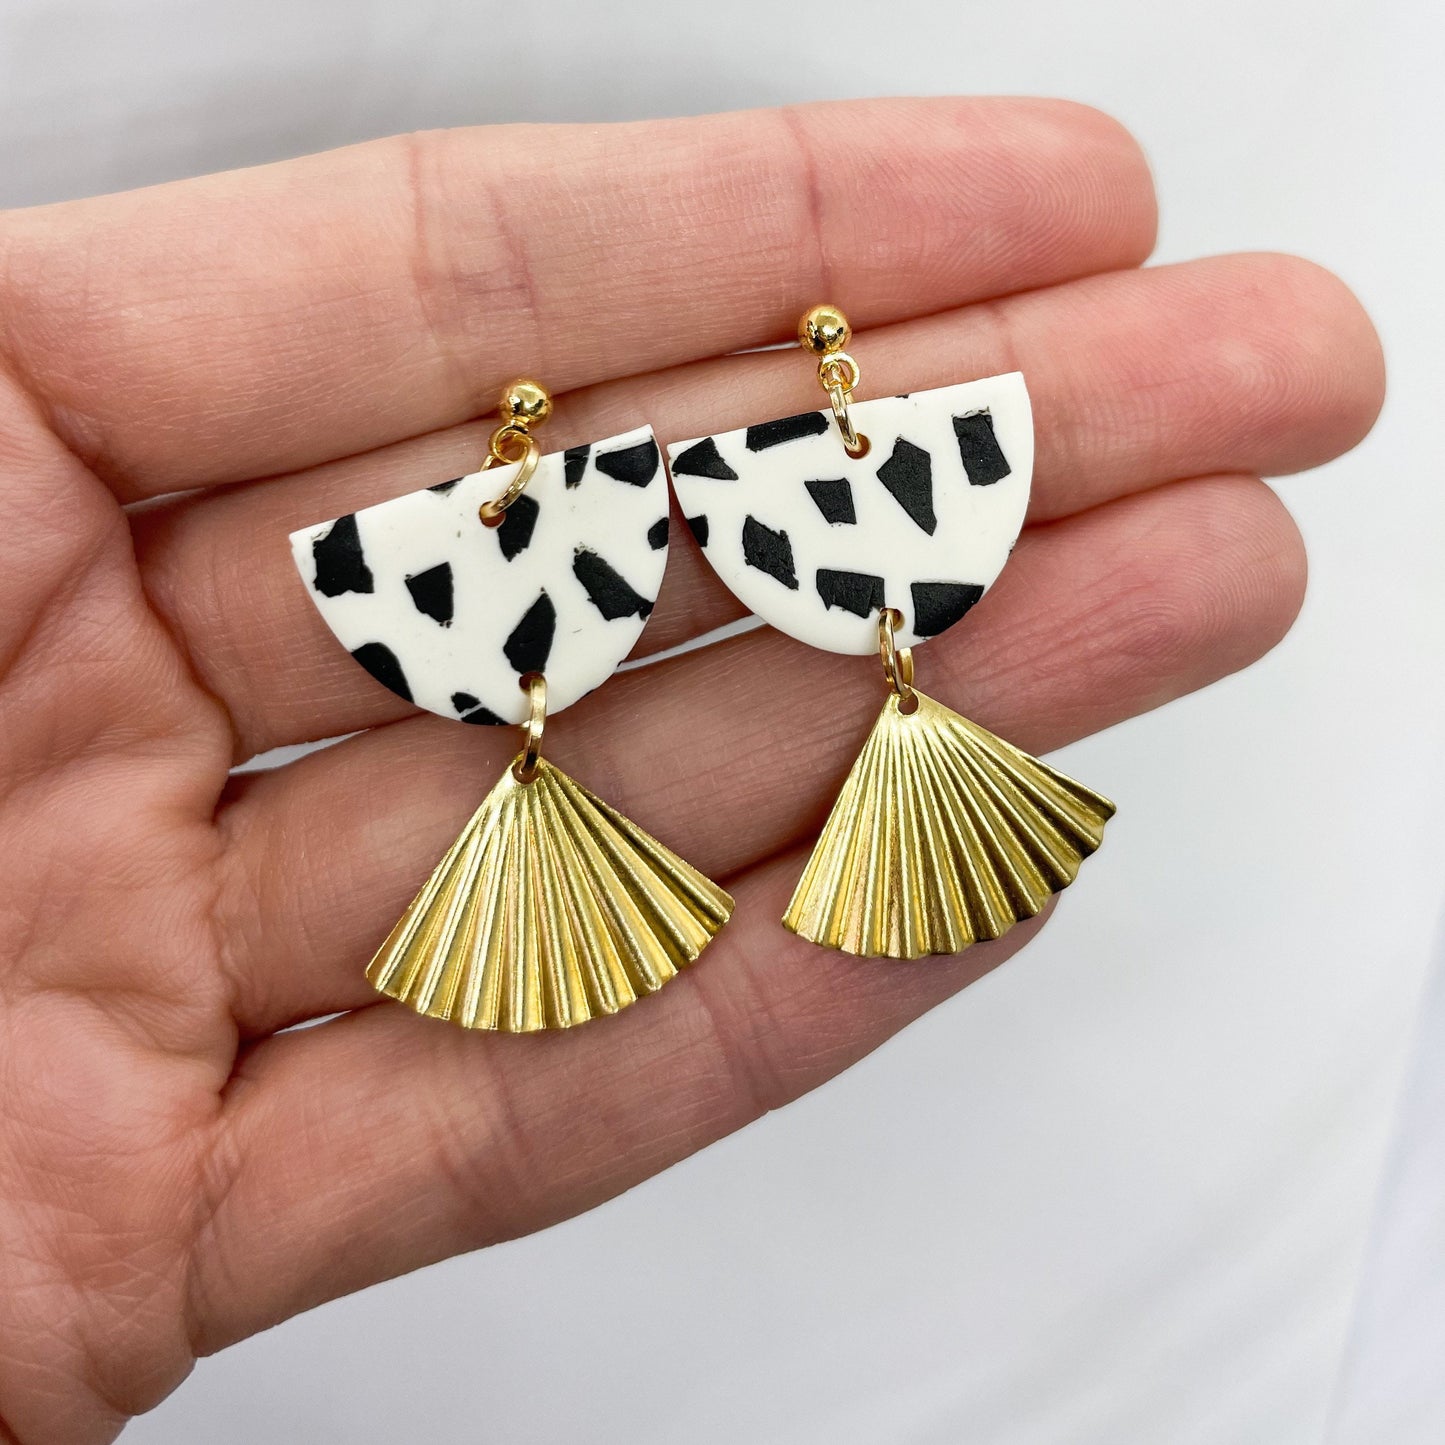 Dangle polymer clay earrings, Dalmatian print, Mother’s Day gift, post box gift, best friend birthday gift, girlfriend gift,